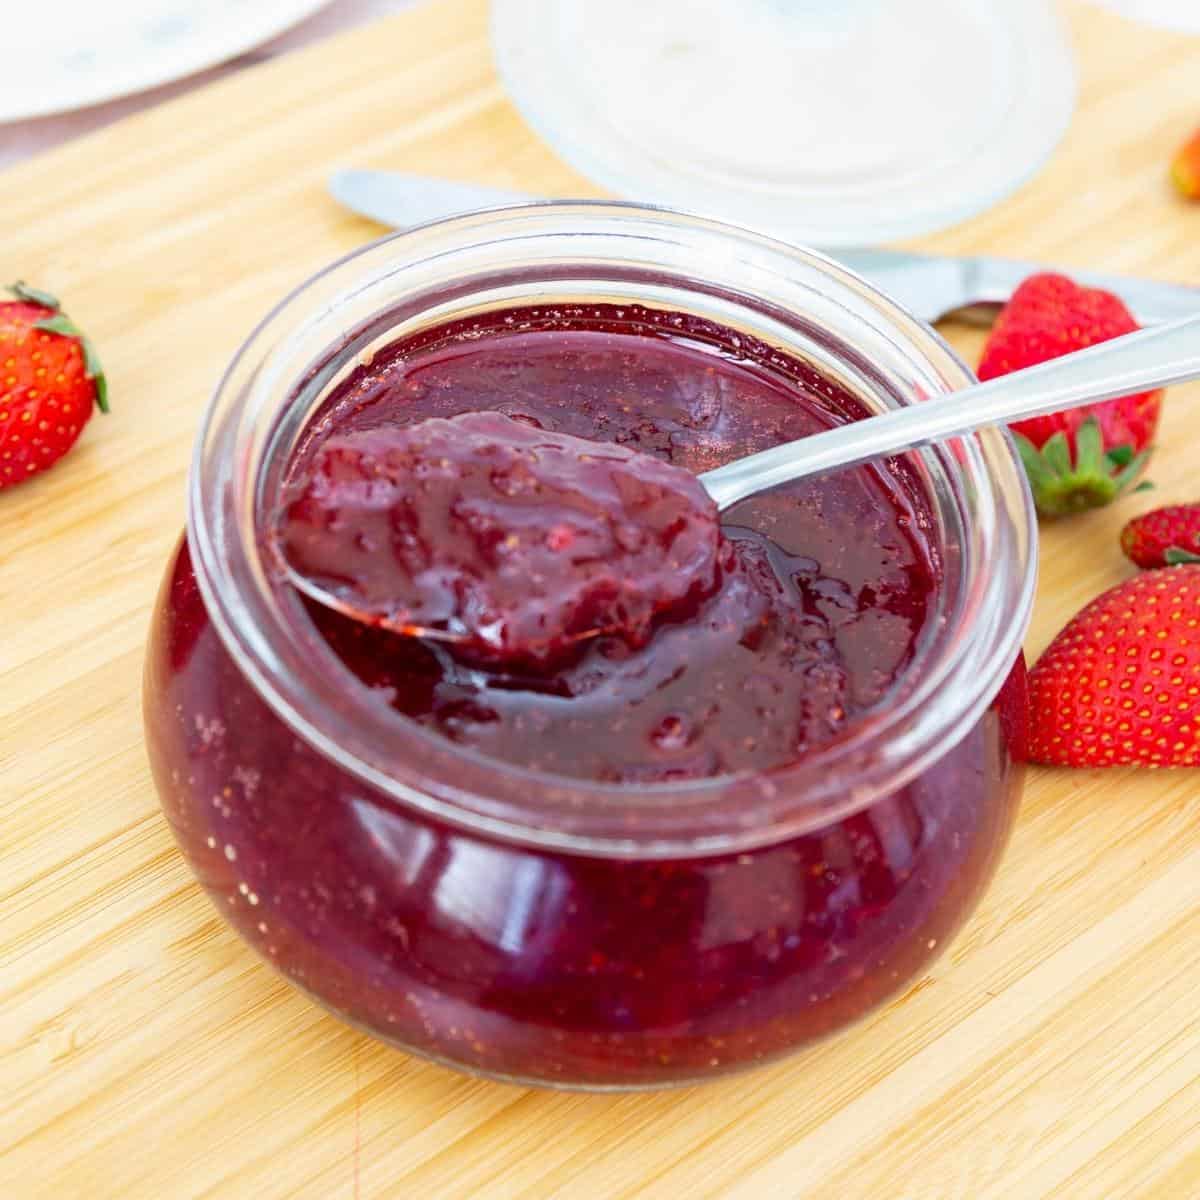 A bowl with strawberry jam and a spoon.